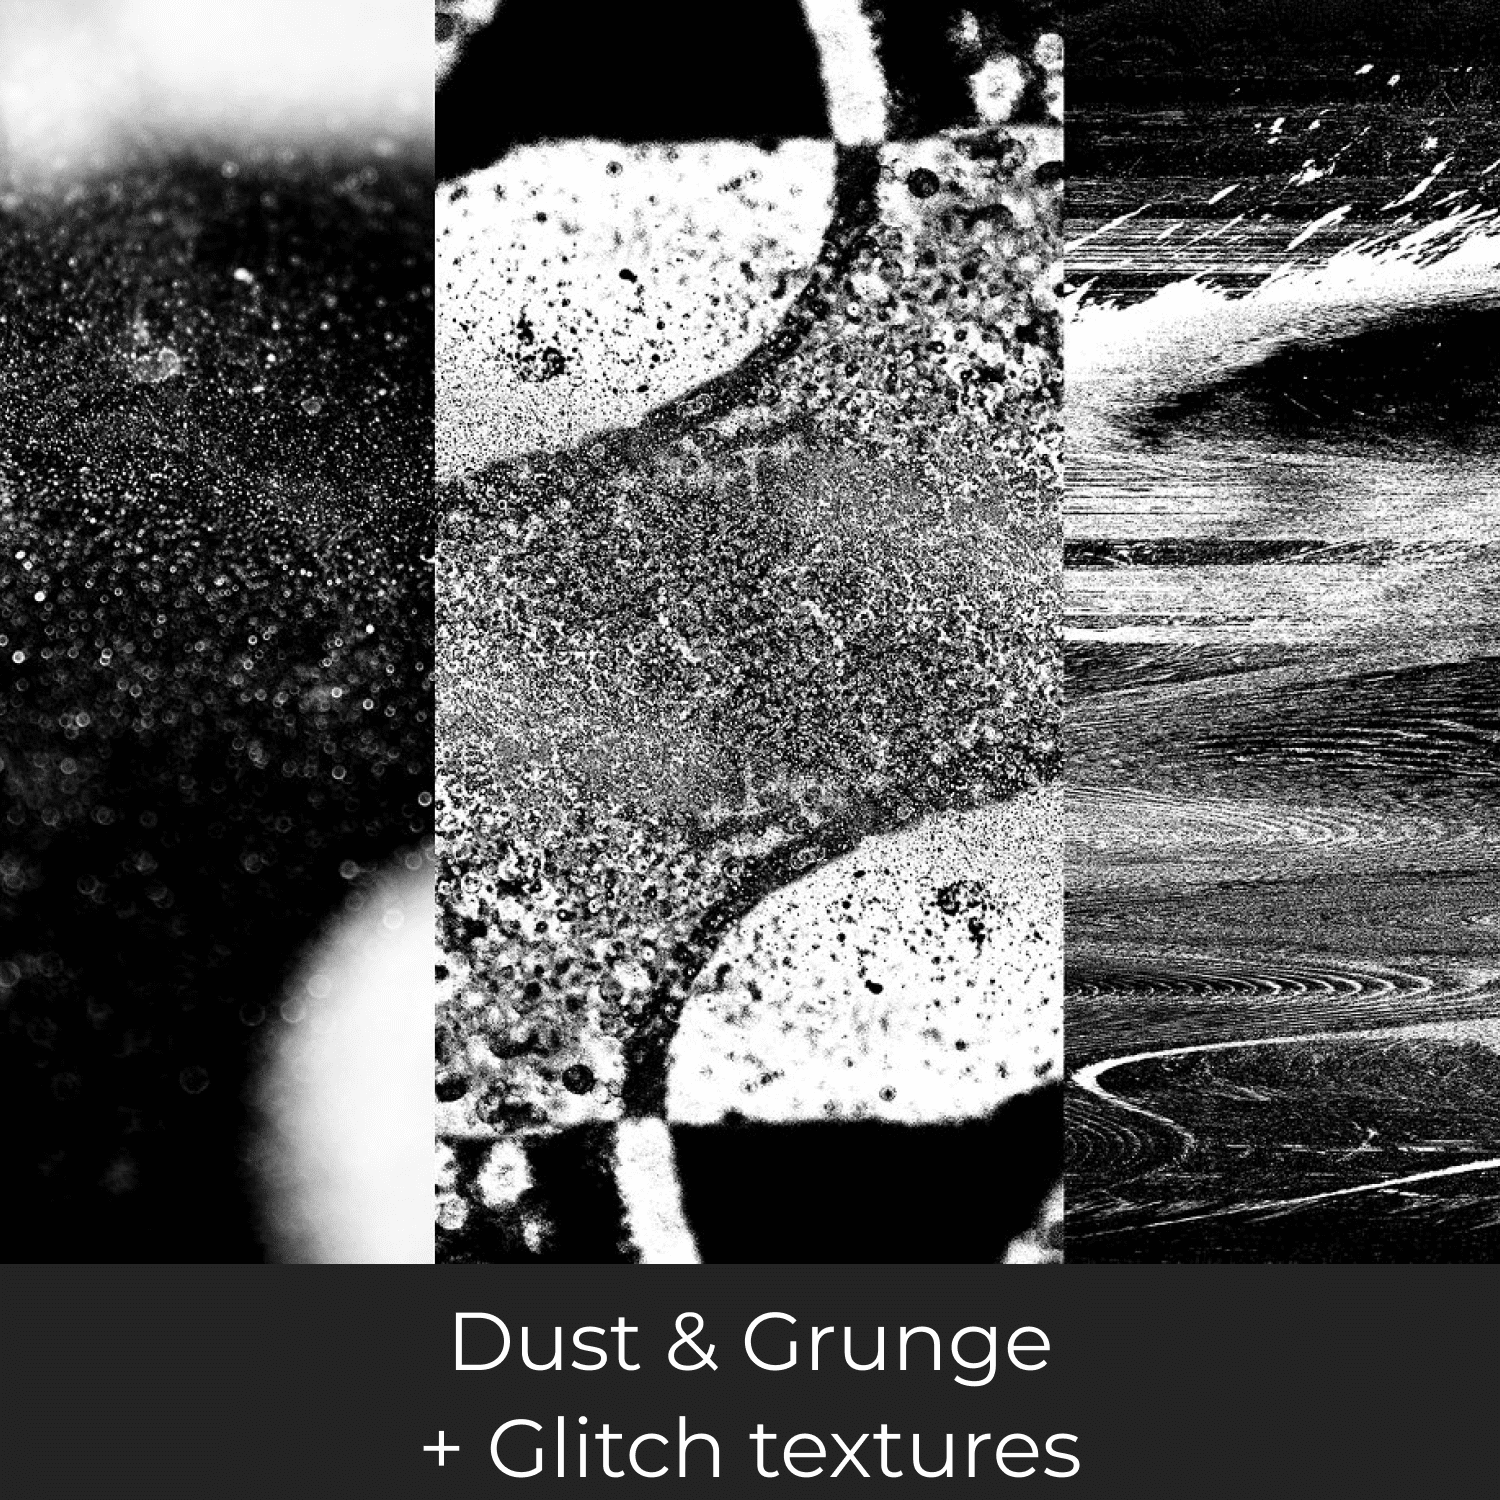 Dust & Grunge + Glitch textures cover.